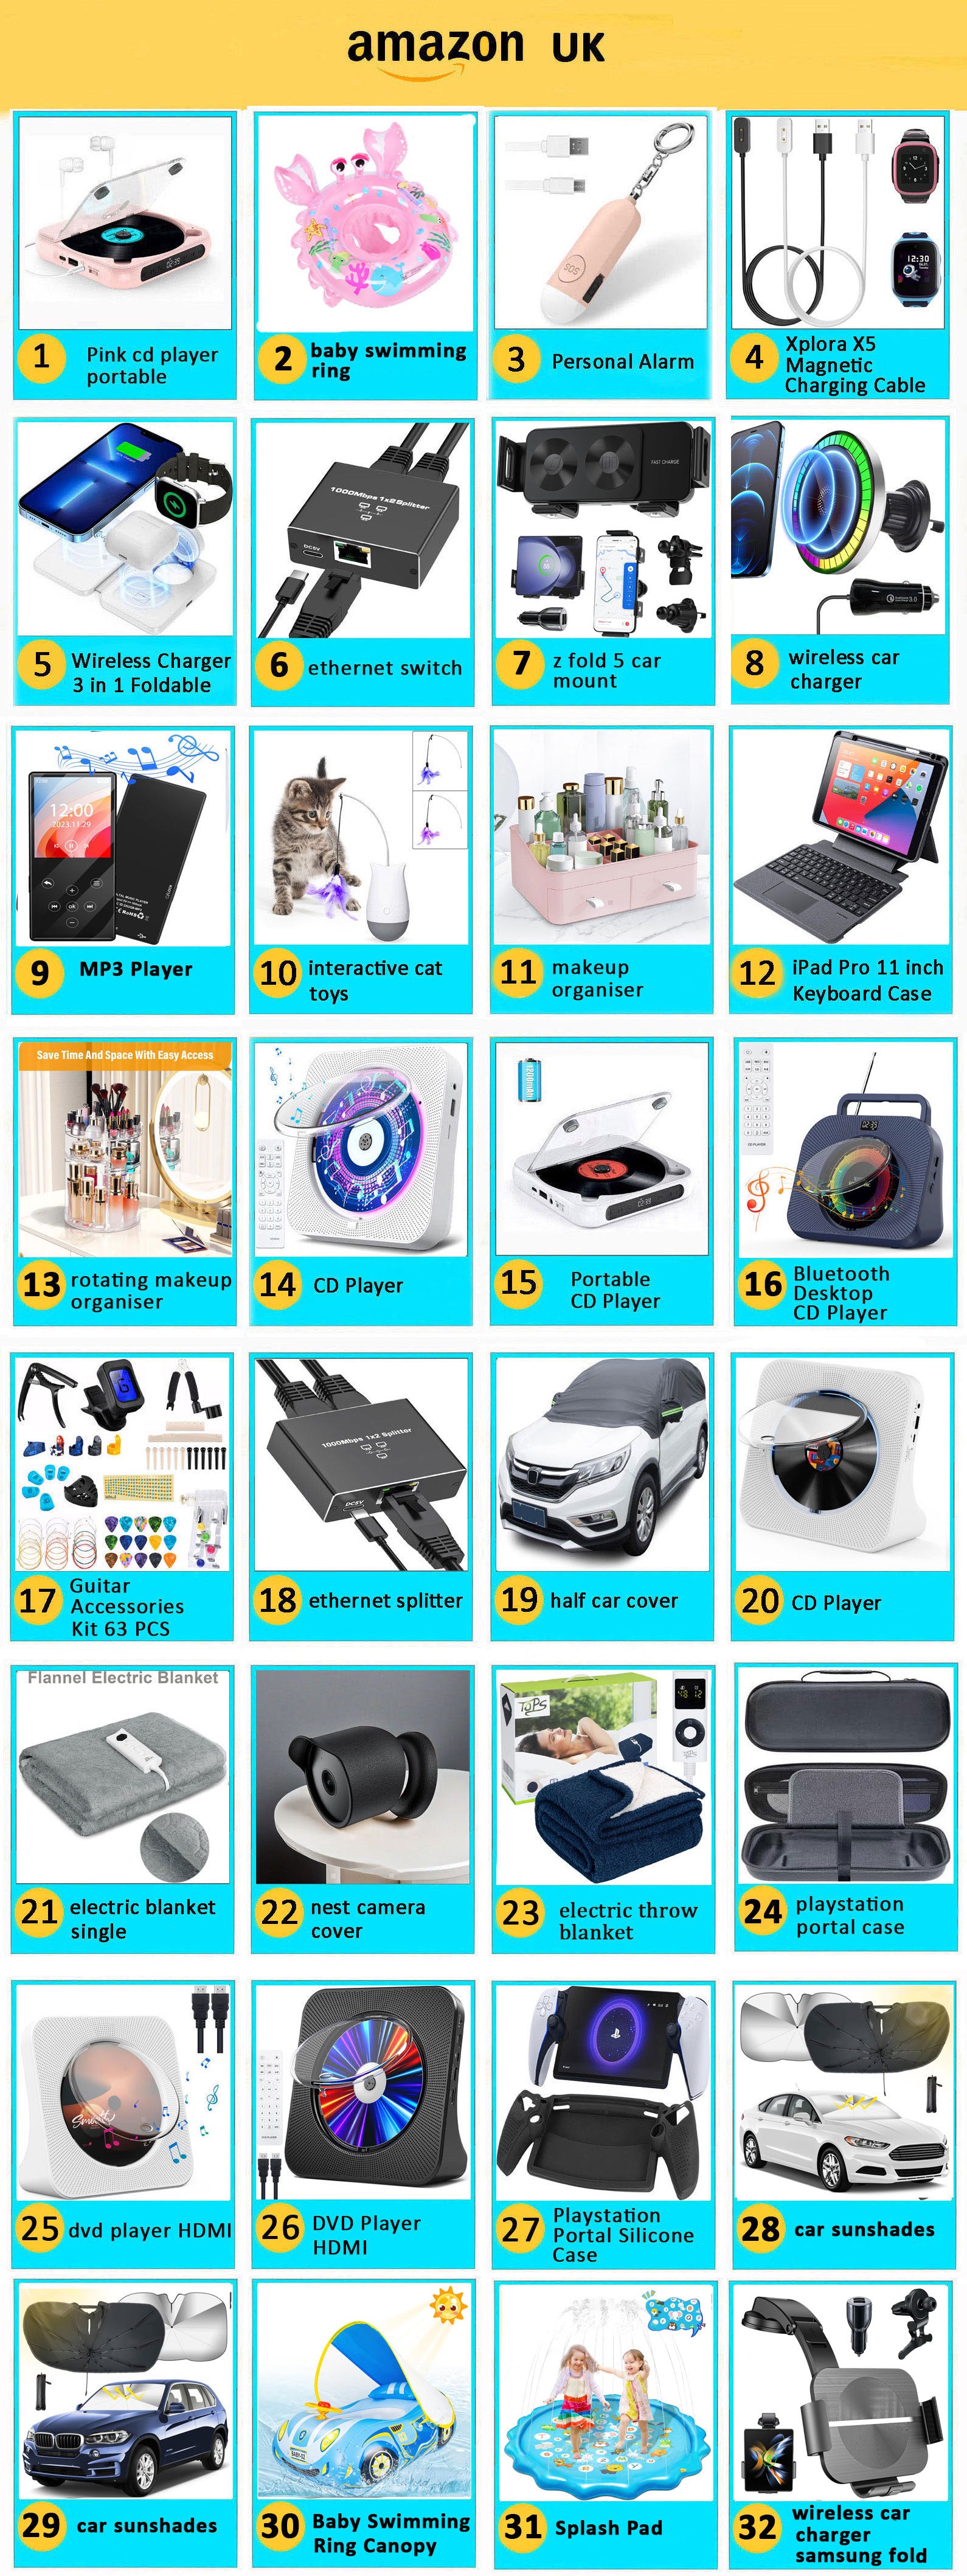 UK-Home & Garden, Electronics, Outdoors, Toys and so on